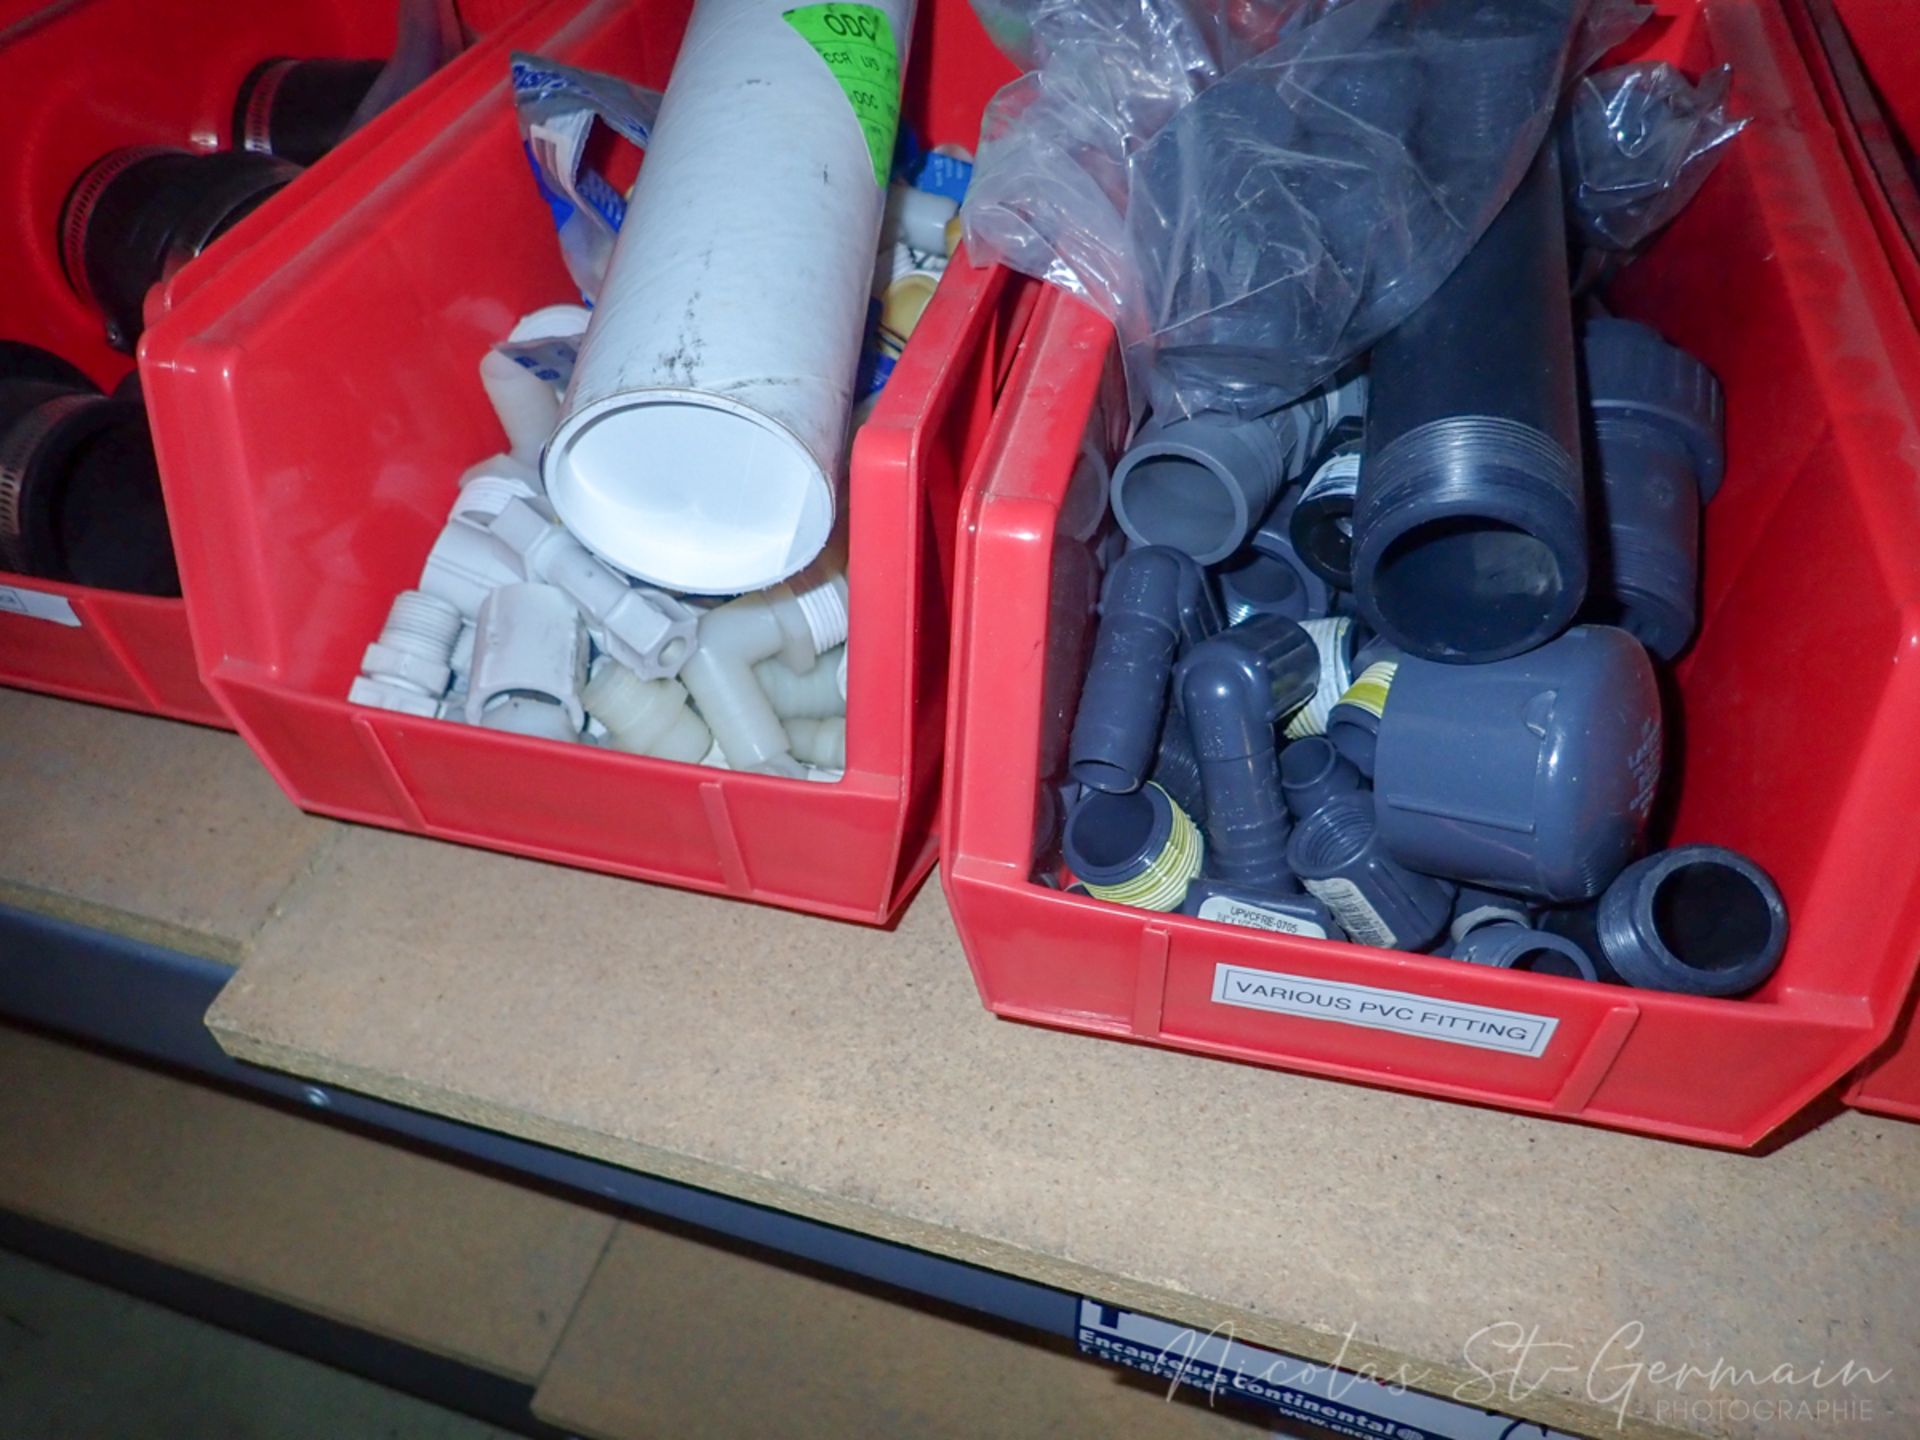 LOT OF ASSORTED S/S & PVC FITTINGS W/ PLASTIC BINS (1 SHELVE - 1 SIDE) - Image 2 of 3